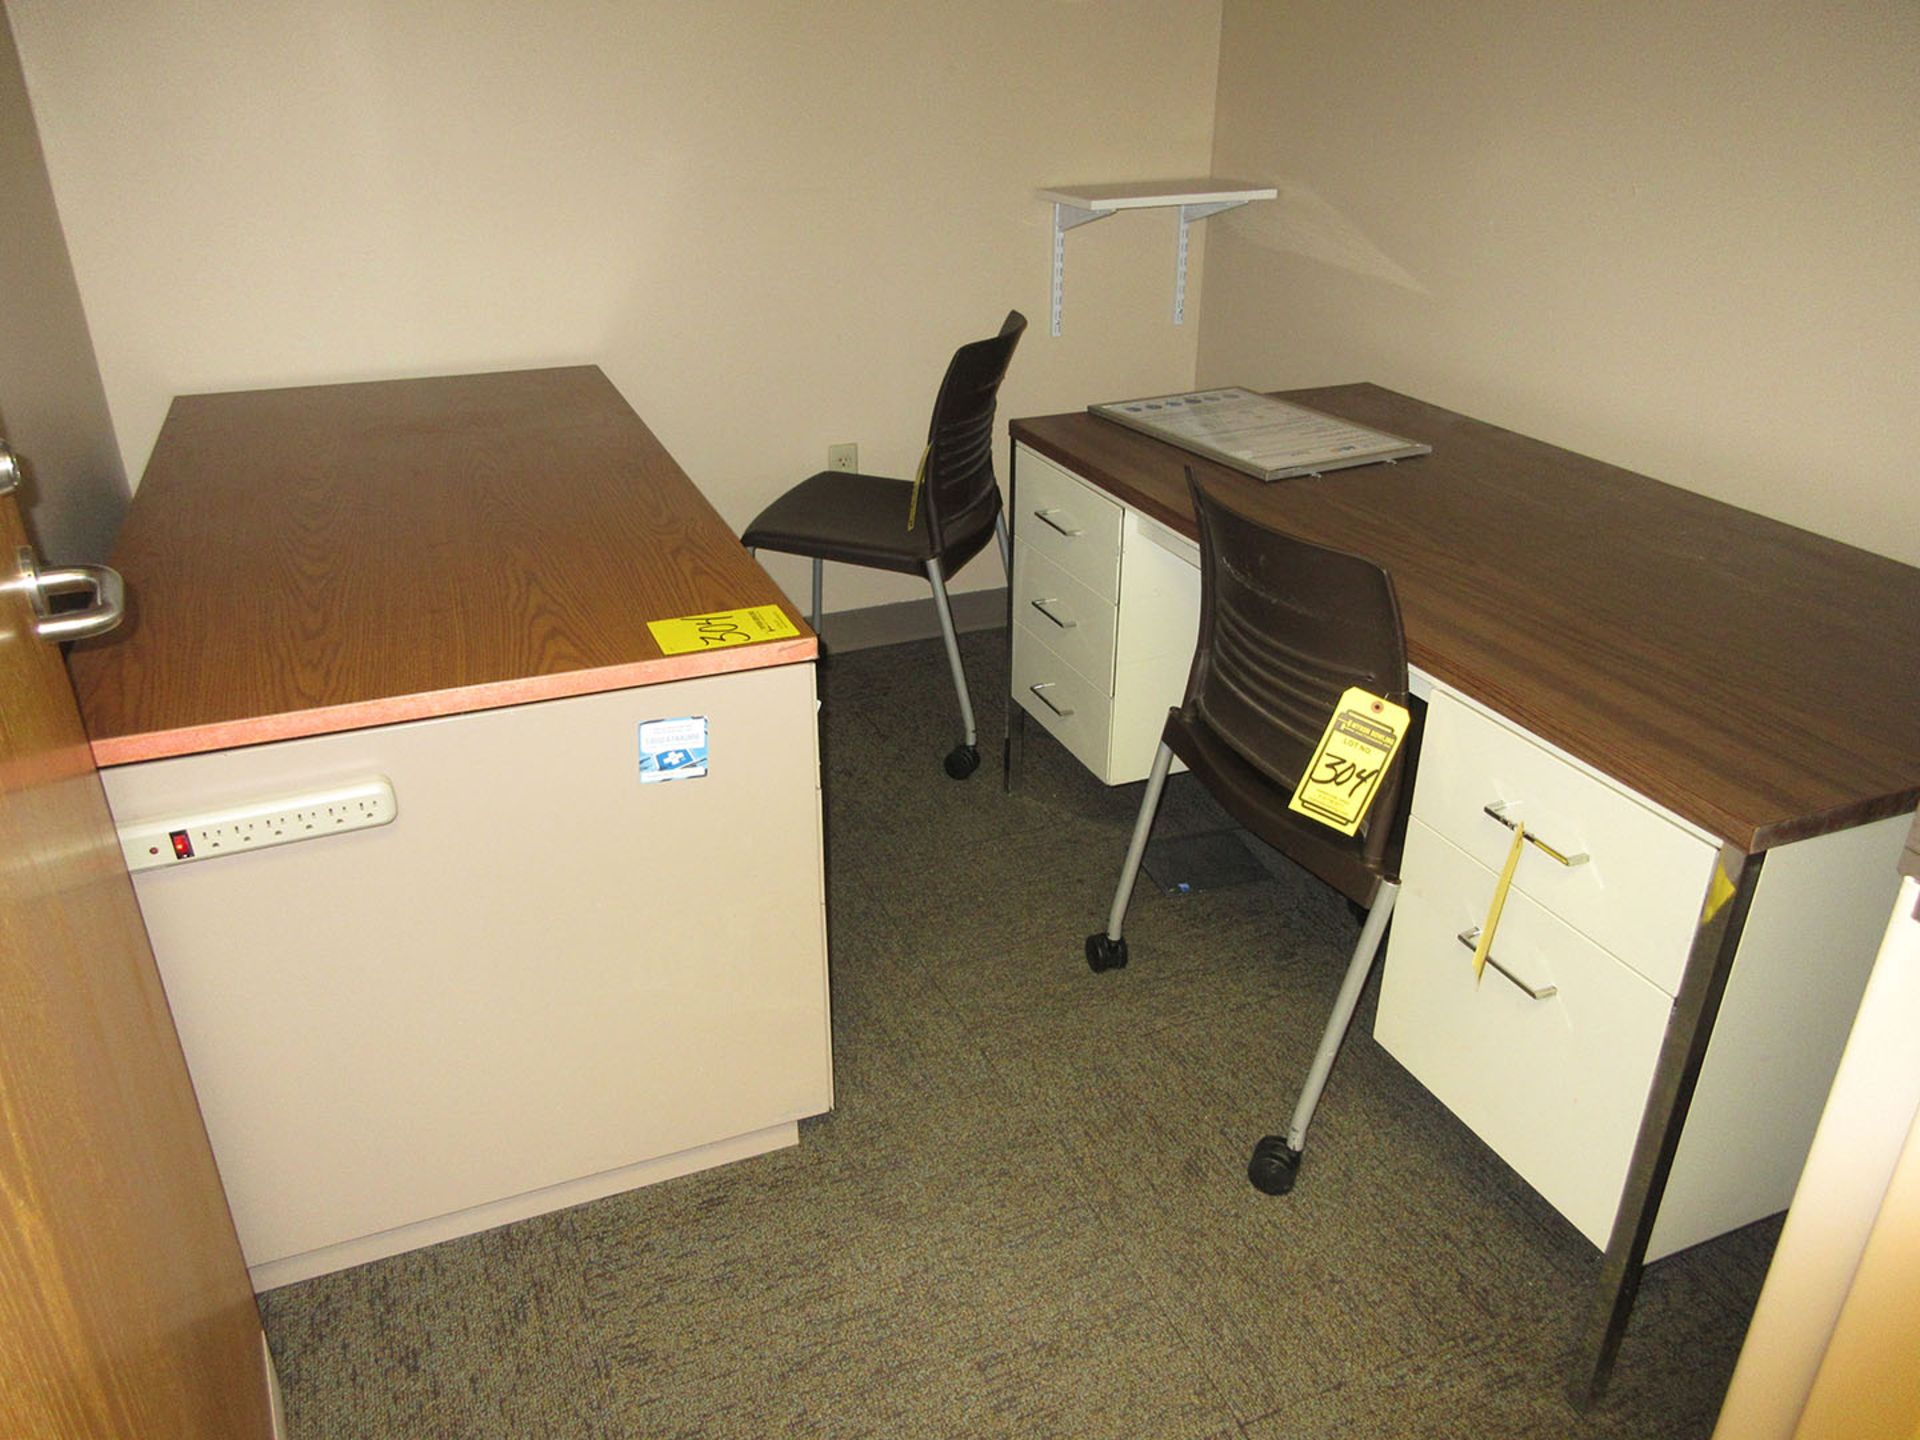 (2) SHELF UNITS, (2) DESKS, AND (2) CHAIRS - Image 2 of 2